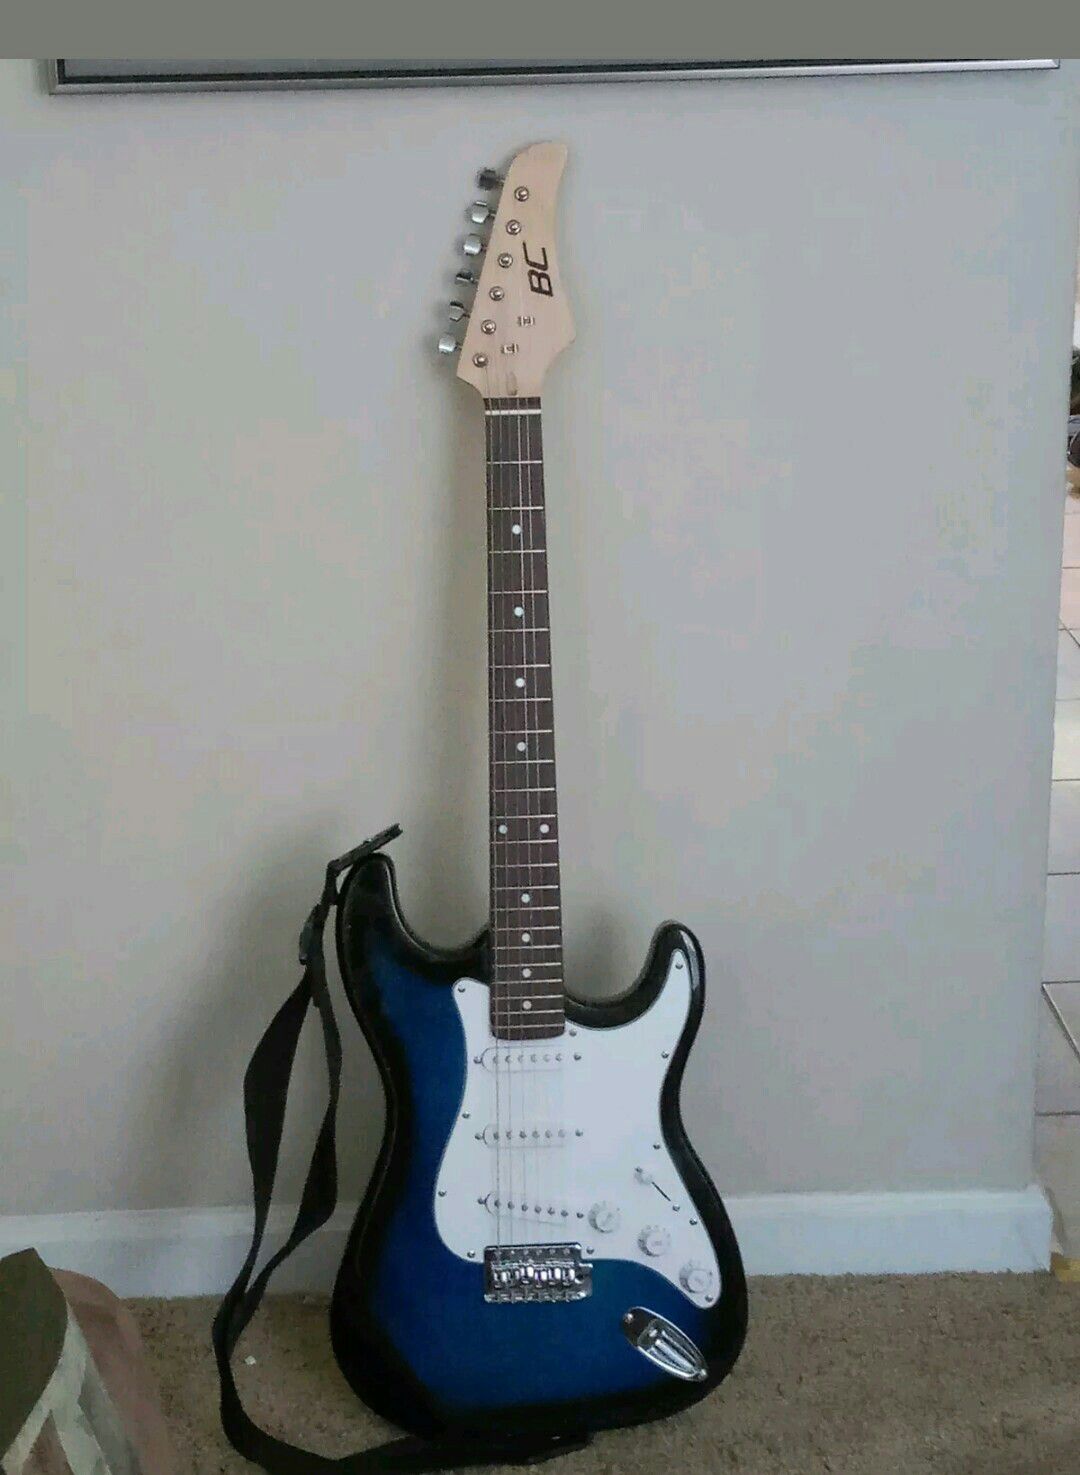 B C ELECTRIC GUITAR with Shoulder Strap.  Medium Size. Comes with shoulder strap.